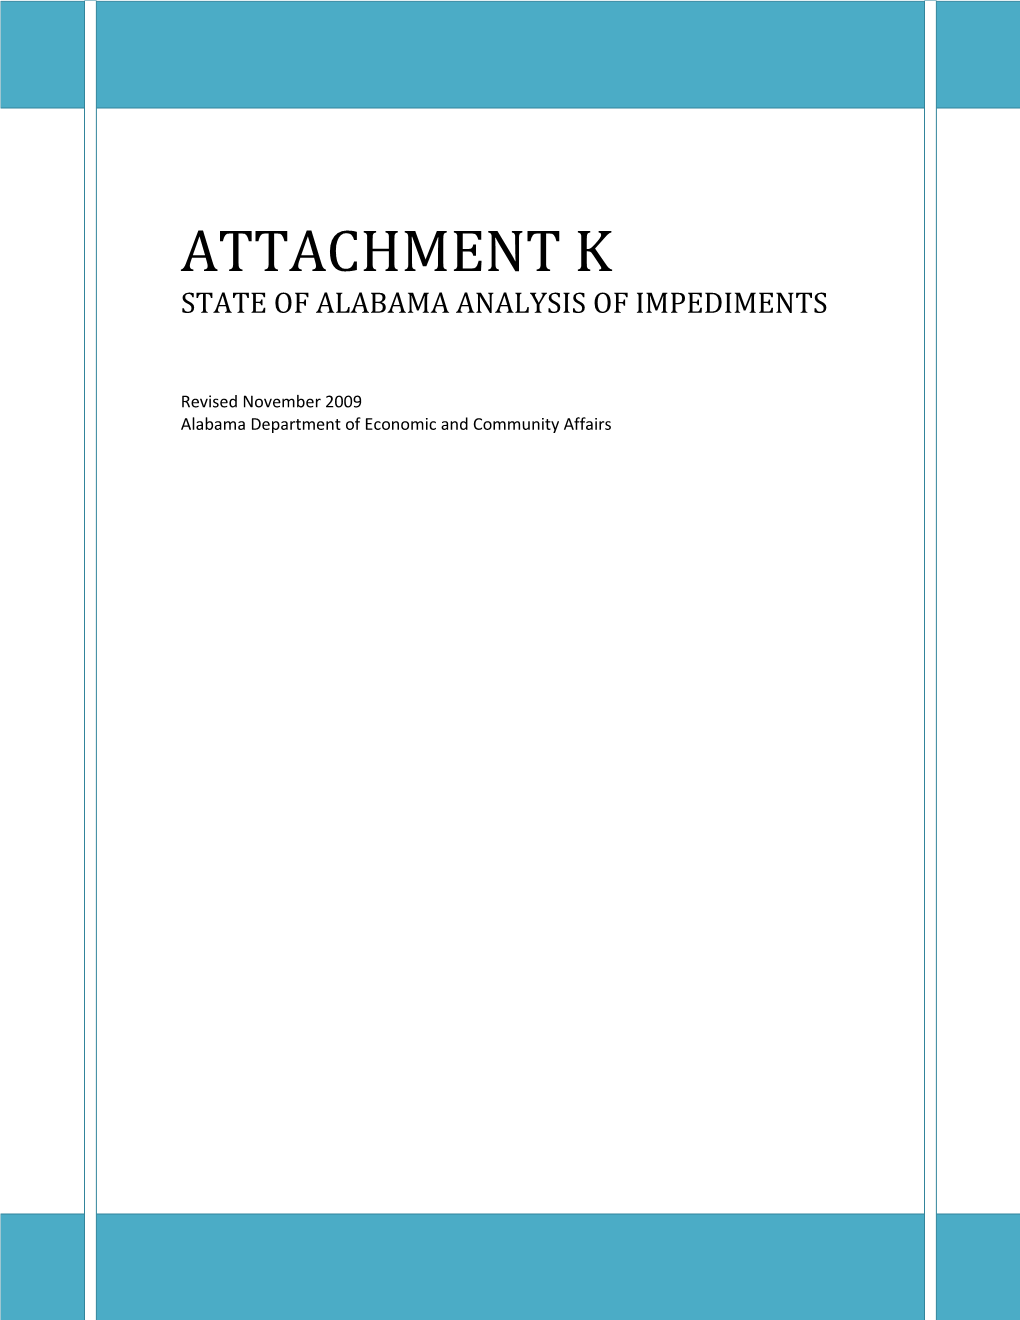 Attachment K Analysis of Impediments